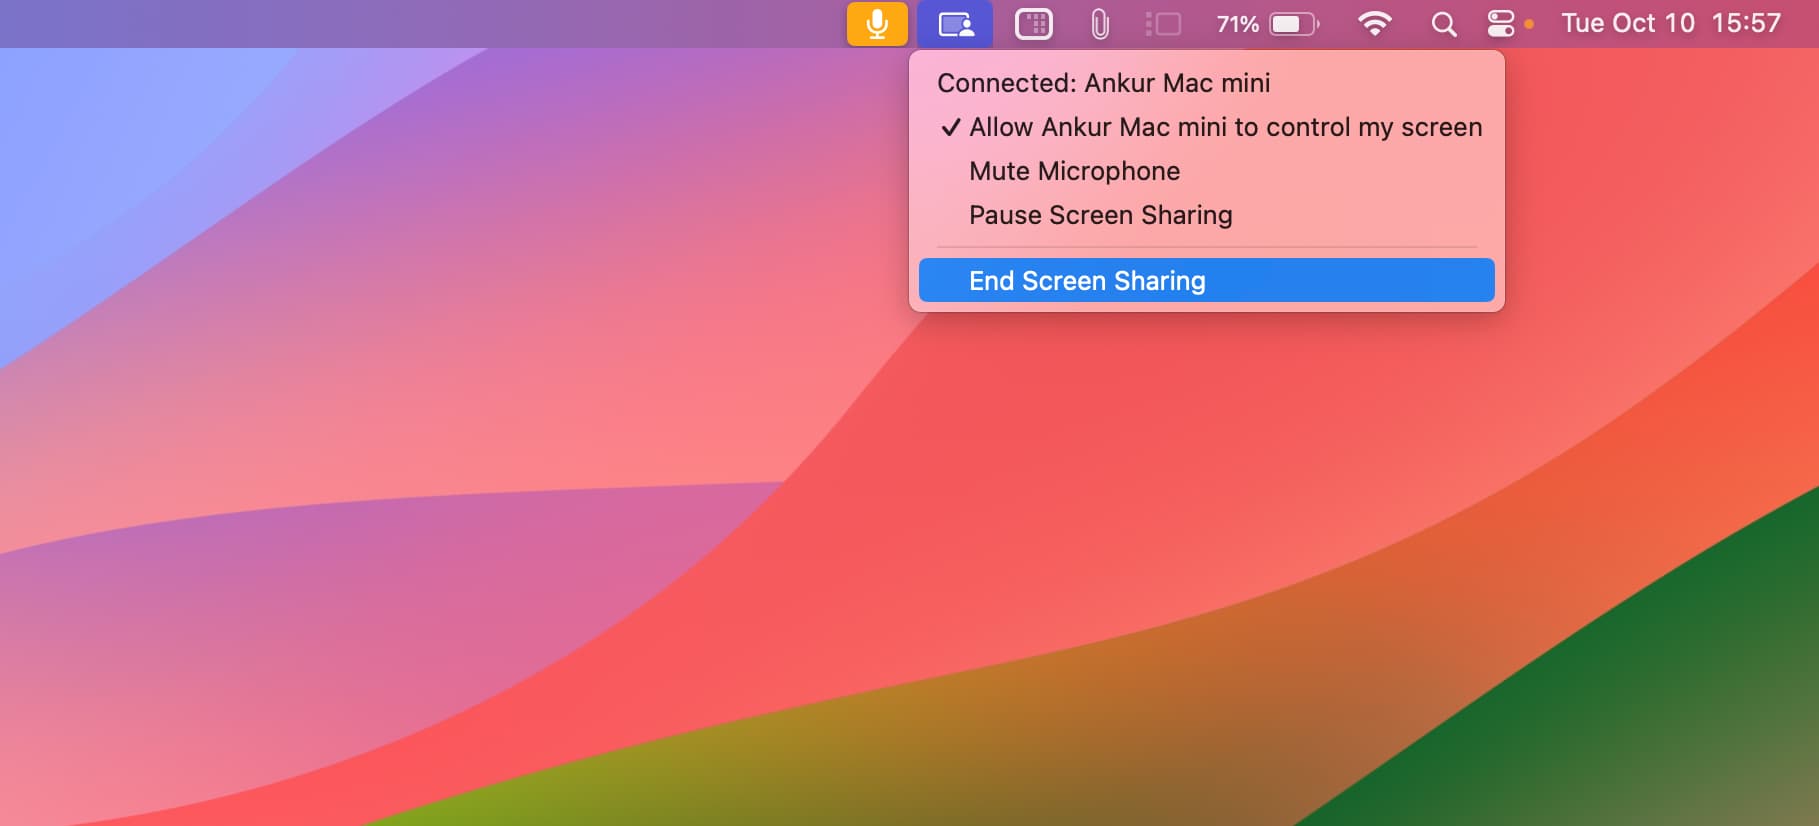 End Screen Sharing from your Mac